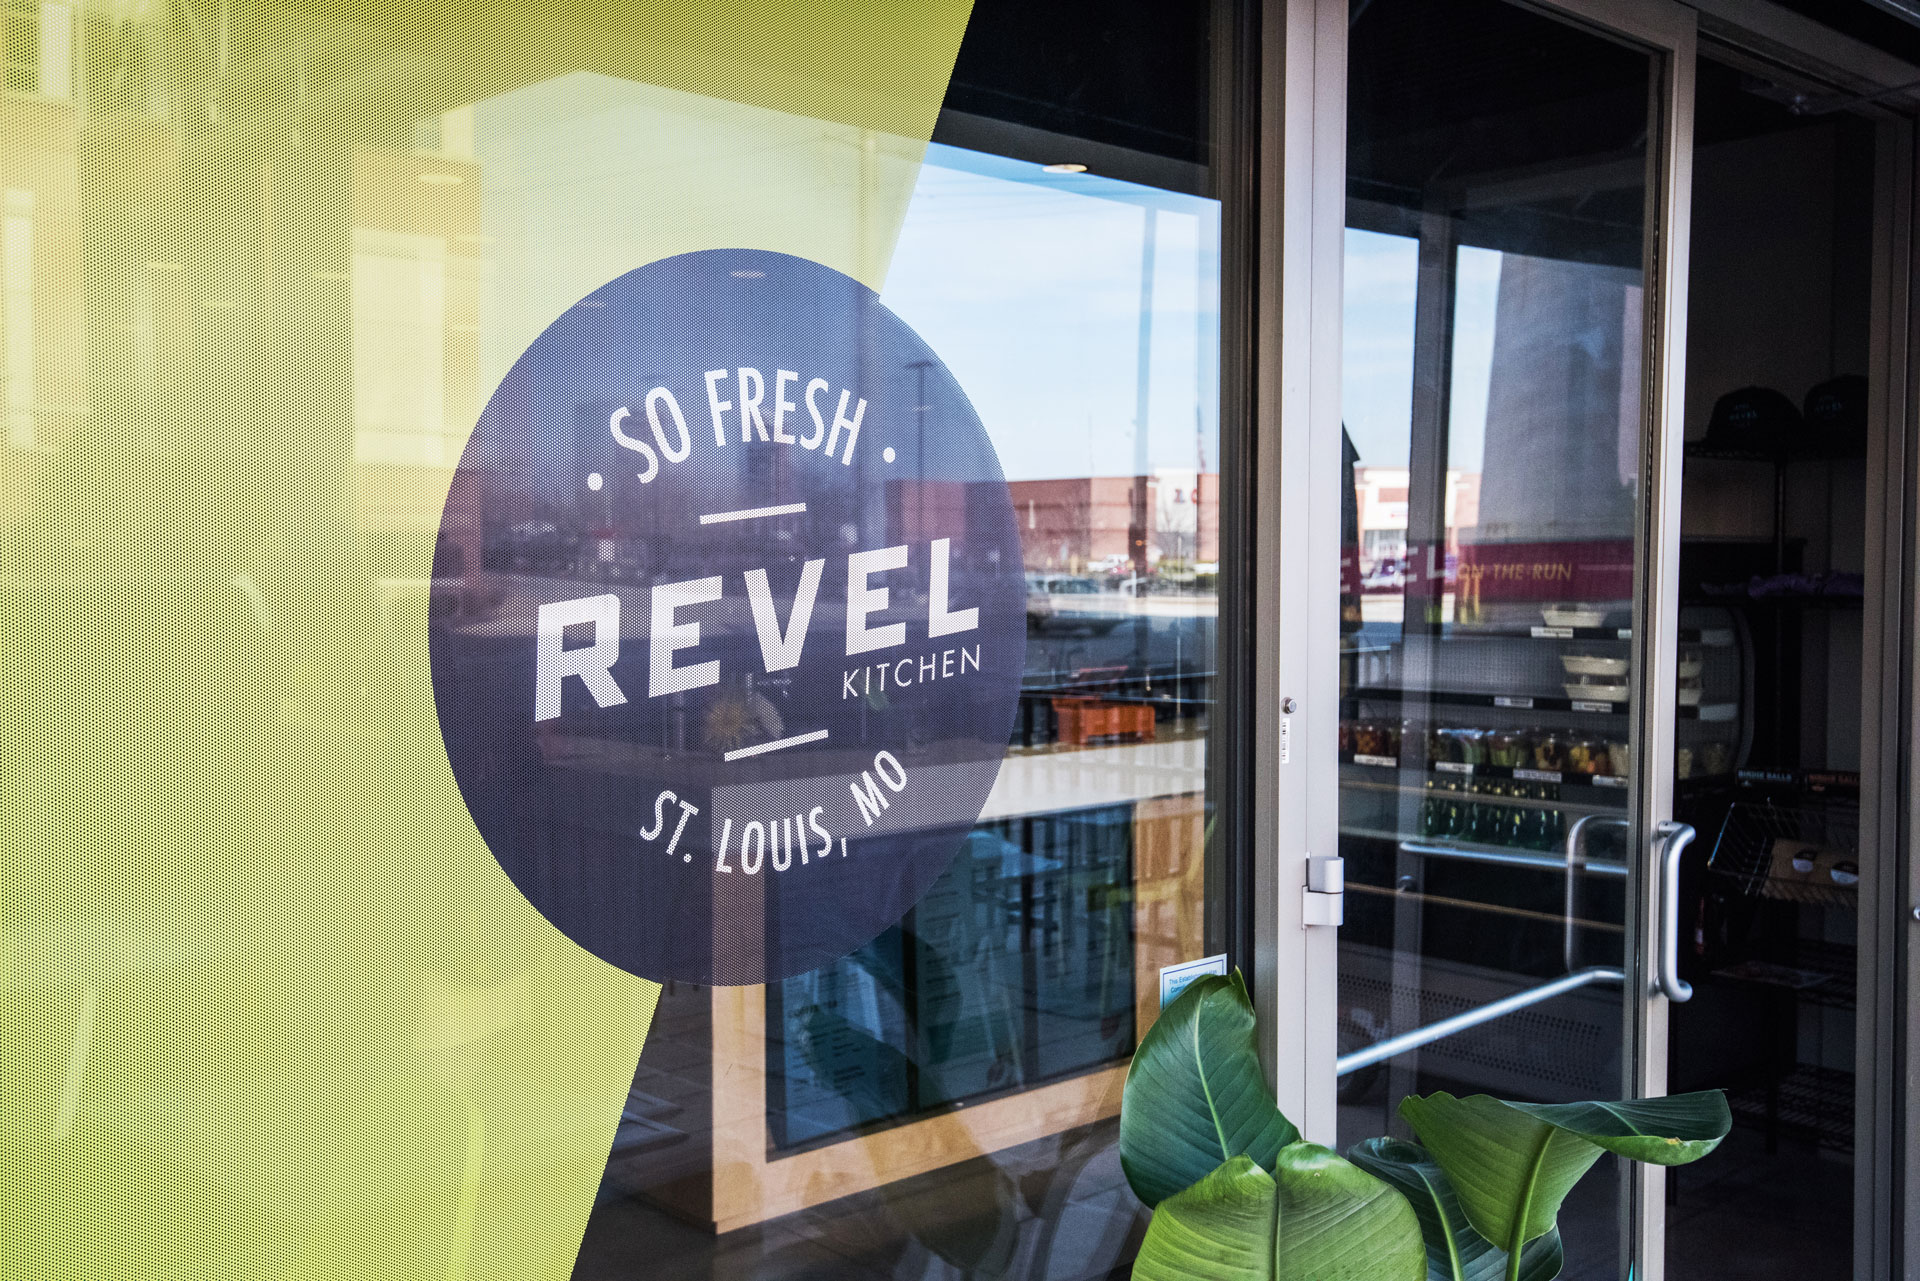 The branded window clings feature the new logo design at Revel Kitchen in St. Louis